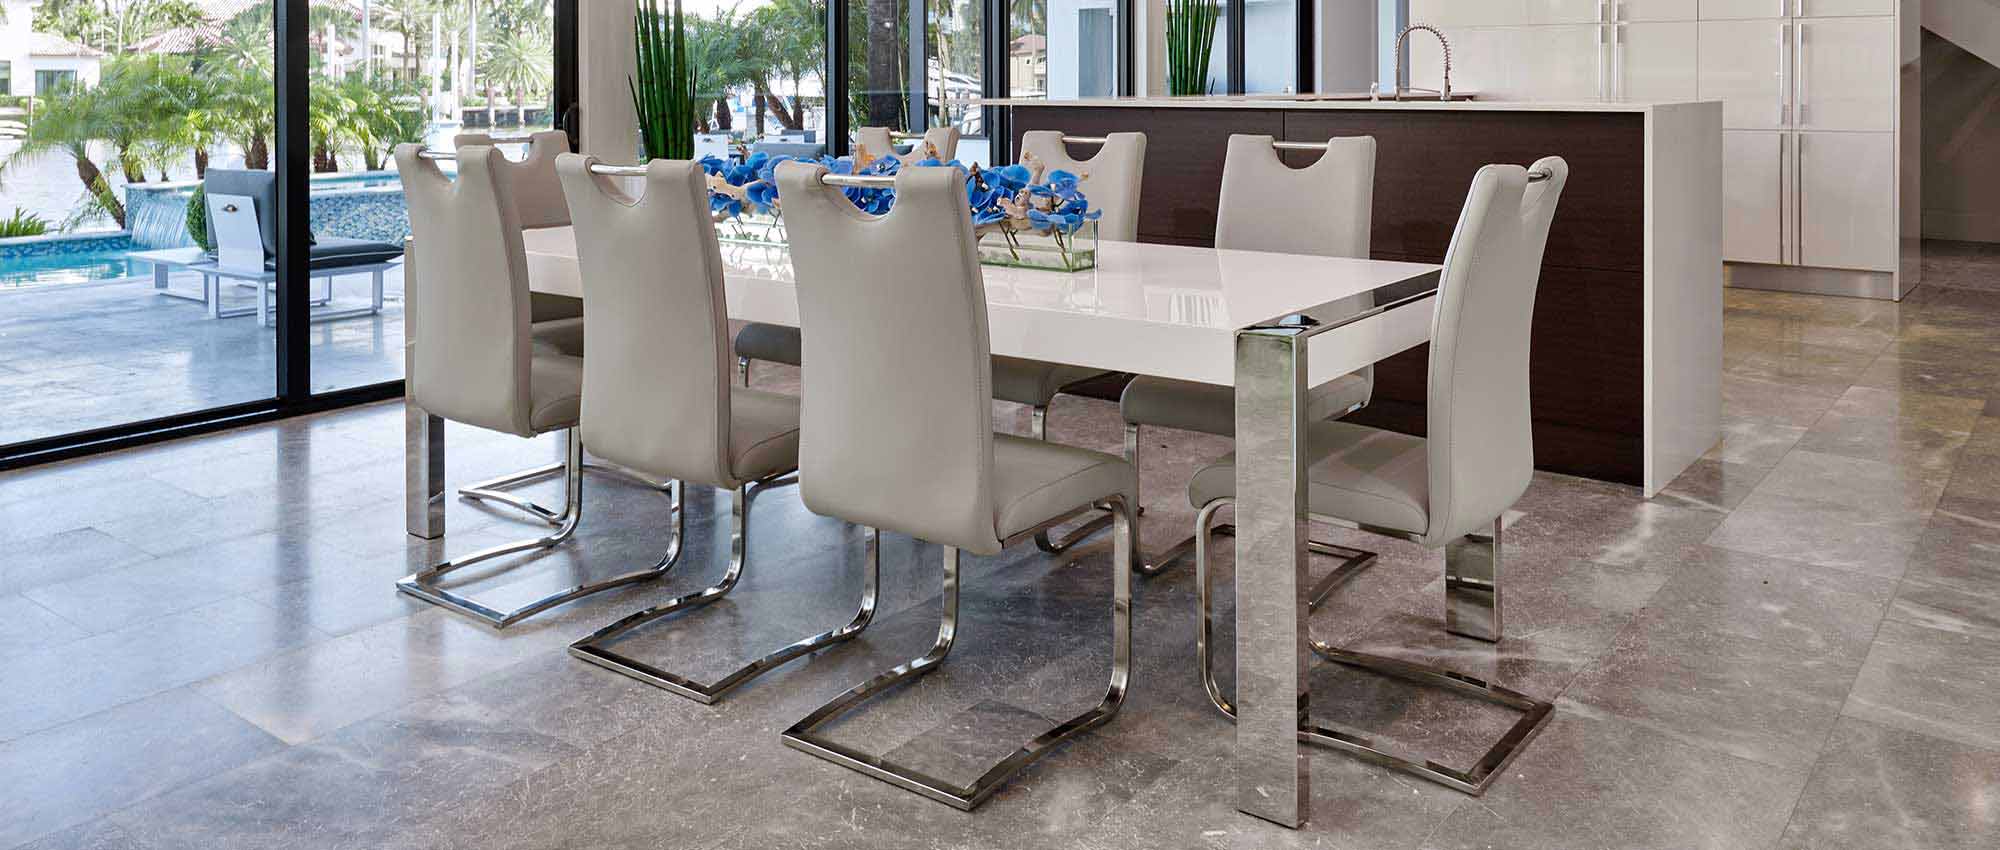 A modern dining room with a white lacquer dining table, grey chairs, and a blue orchid floral table centerpiece. TThere is a large window that lets in natural light.